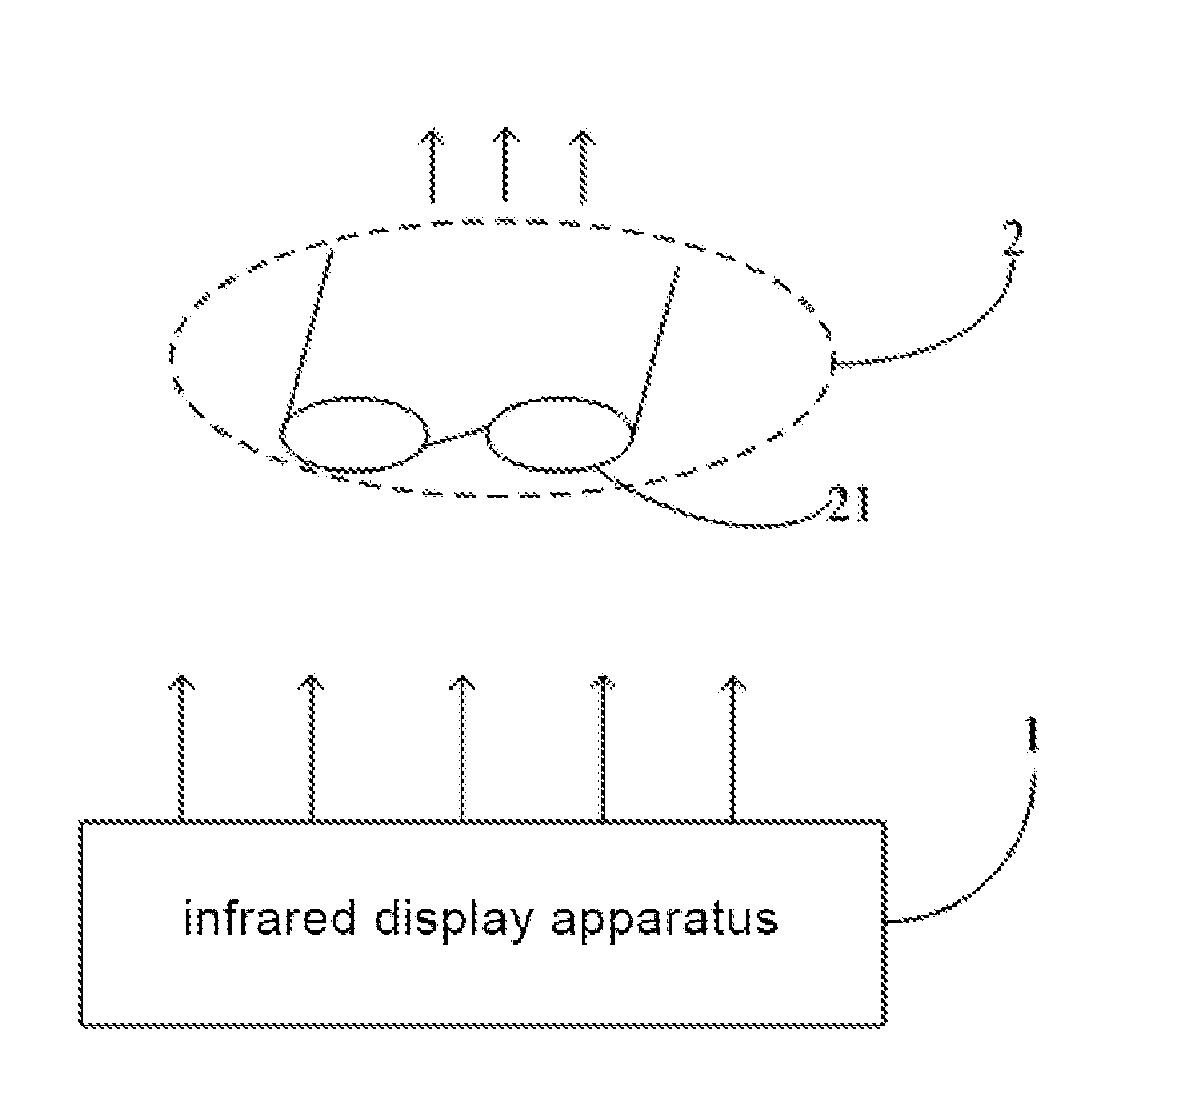 Light valve device, infrared display apparatus, dedicated spectacles and system